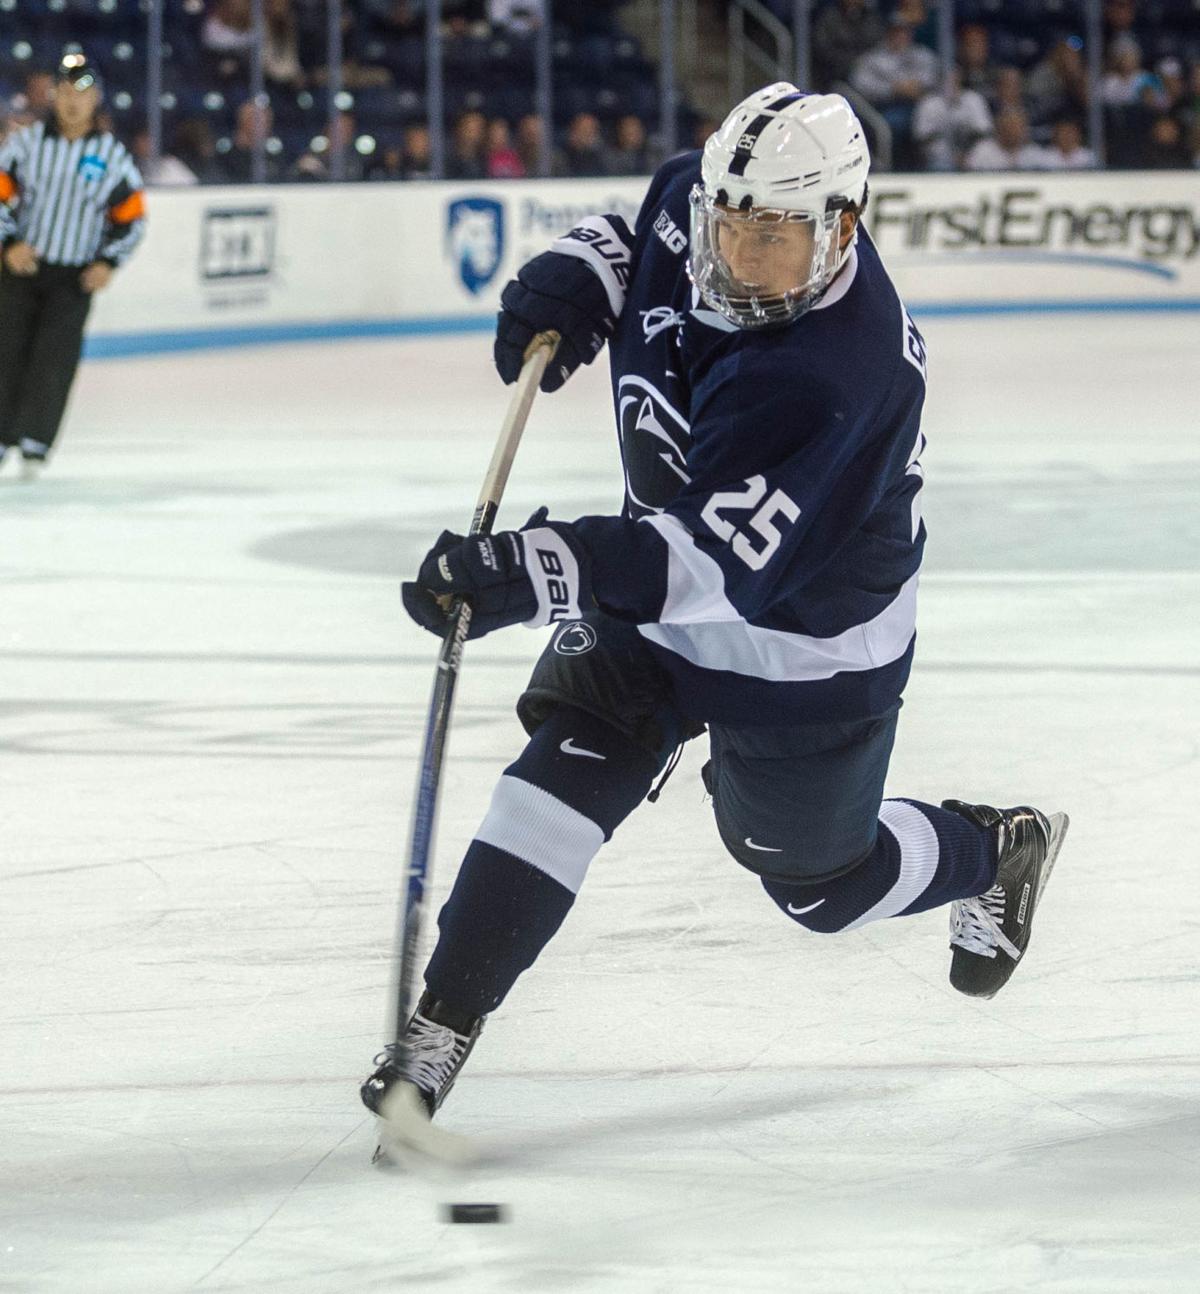 Penn State men's hockey earns first victory over St. Lawrence Men's